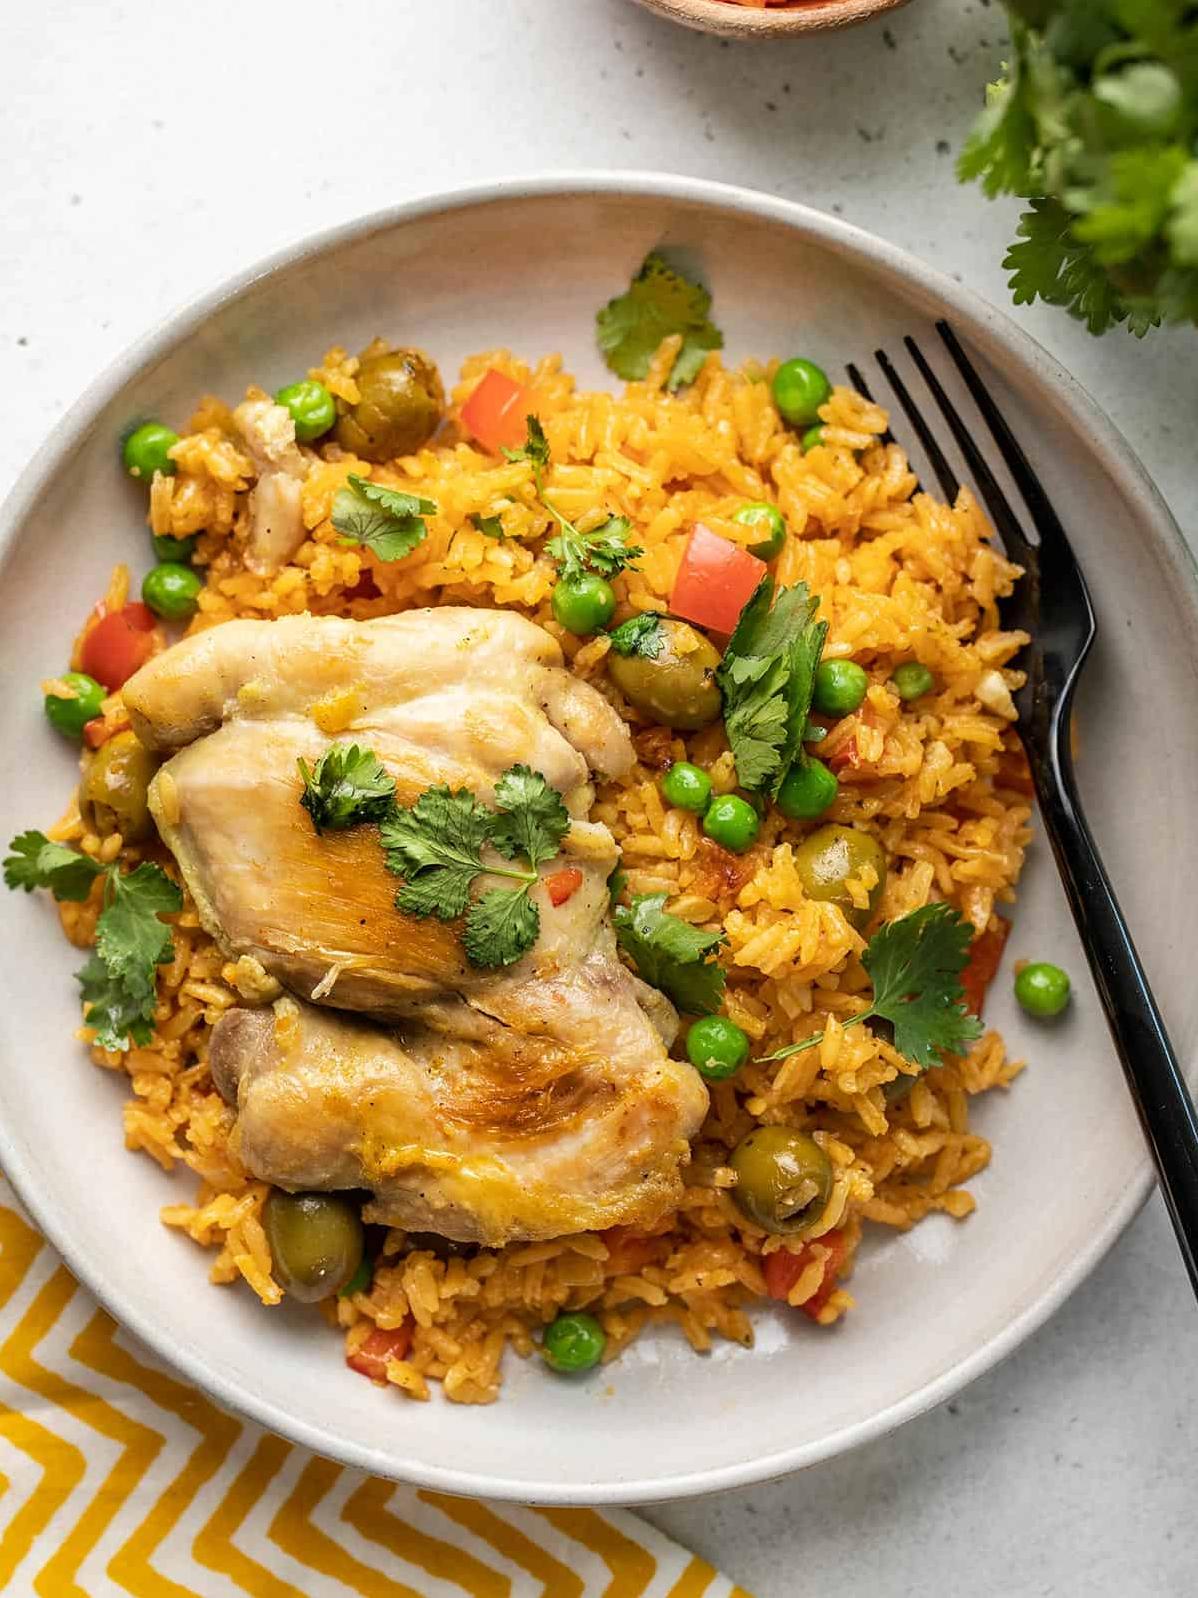  This Puerto Rican favorite is sure to become a regular on your dinner table.